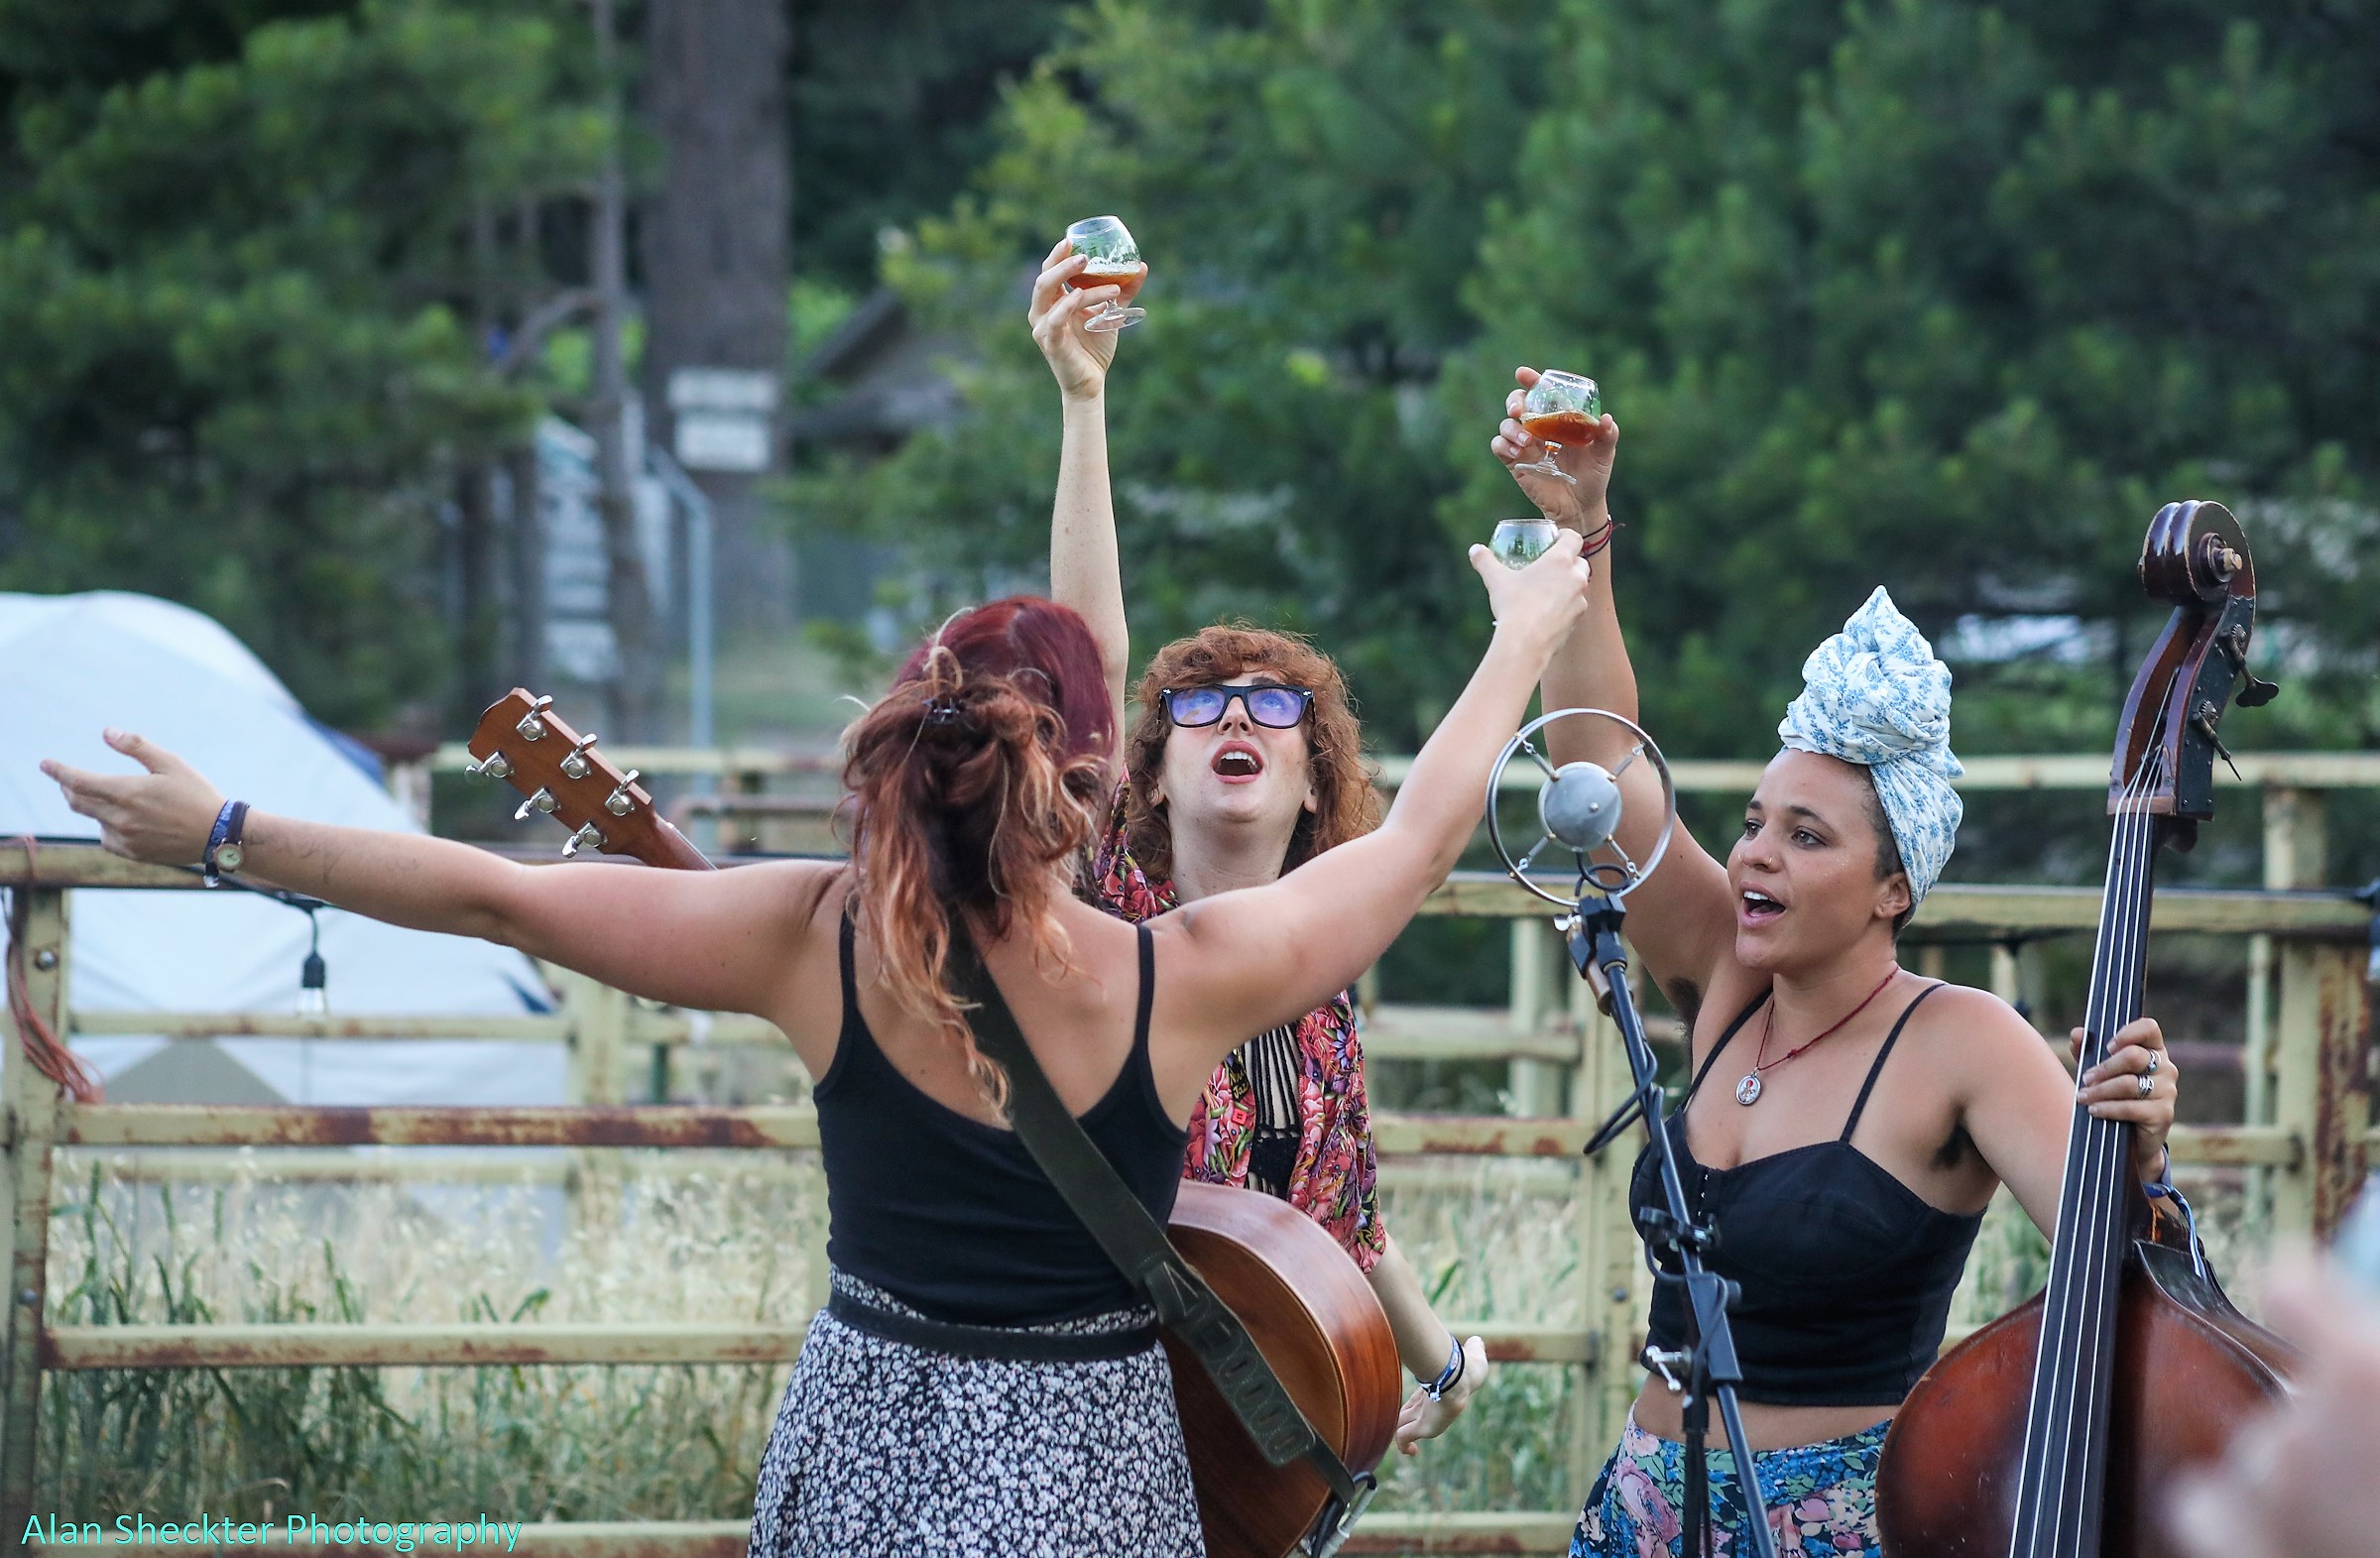 The Rainbow Girls raise their ales to the sky at Sierra Nevada Brewery’s Camp Pale Ale